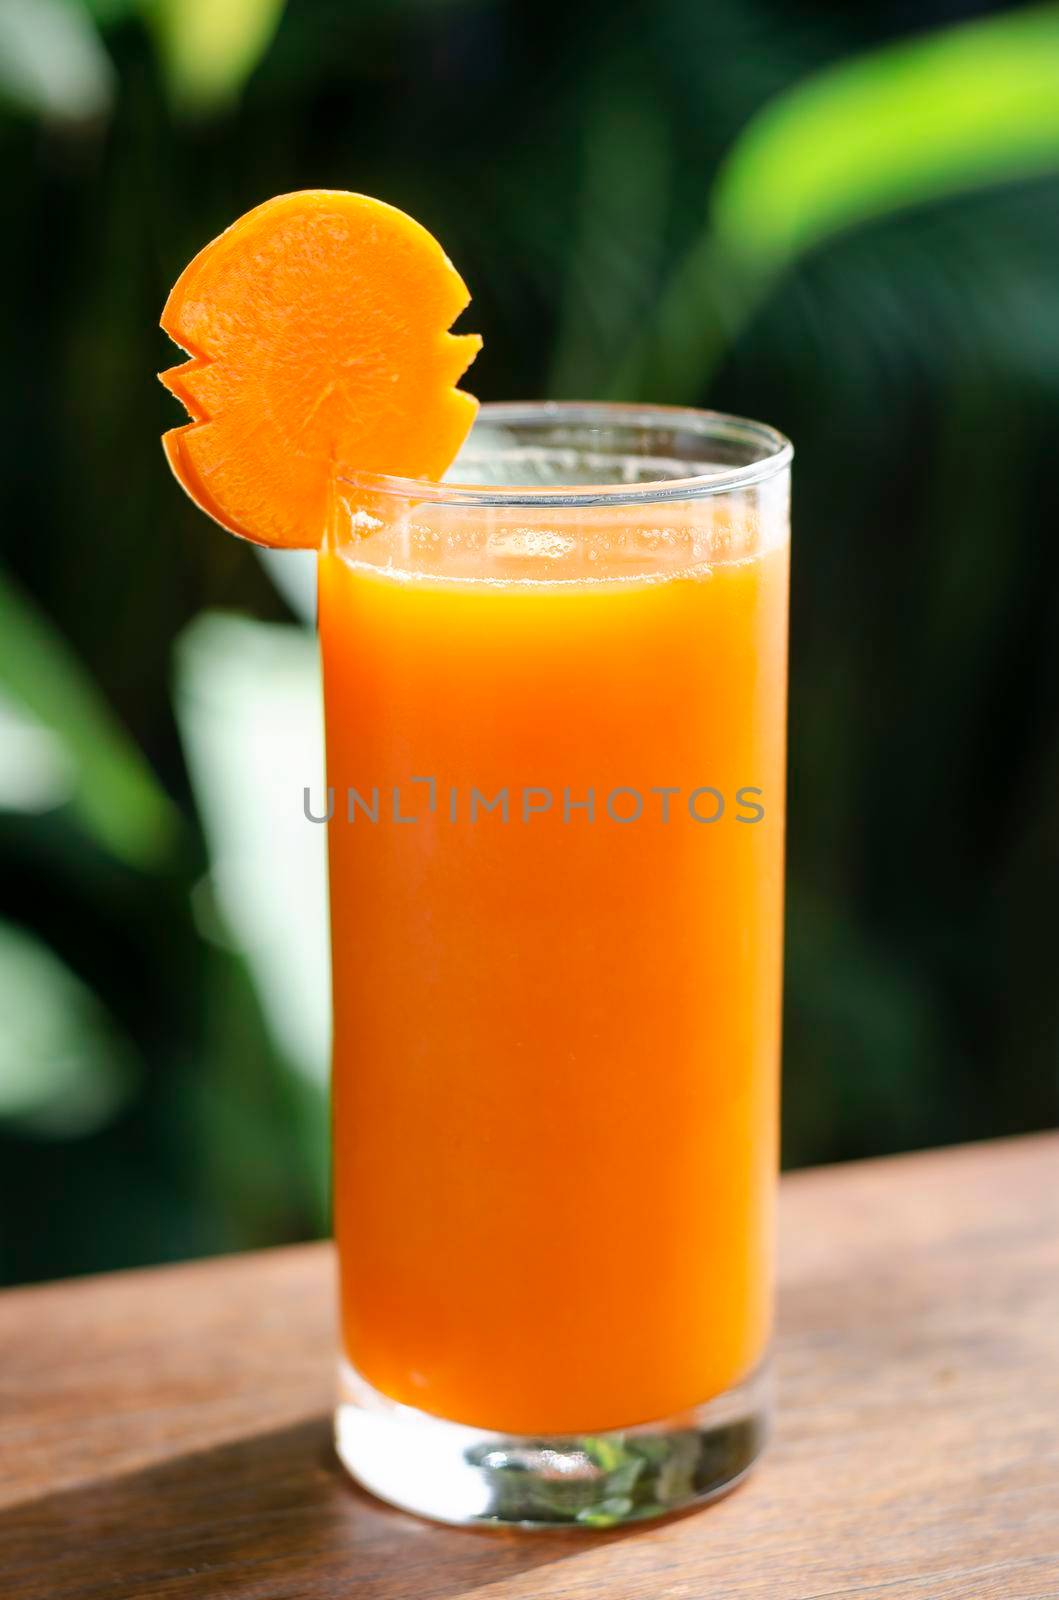 glass of fresh organic carrot juice on garden table outdoors by jackmalipan